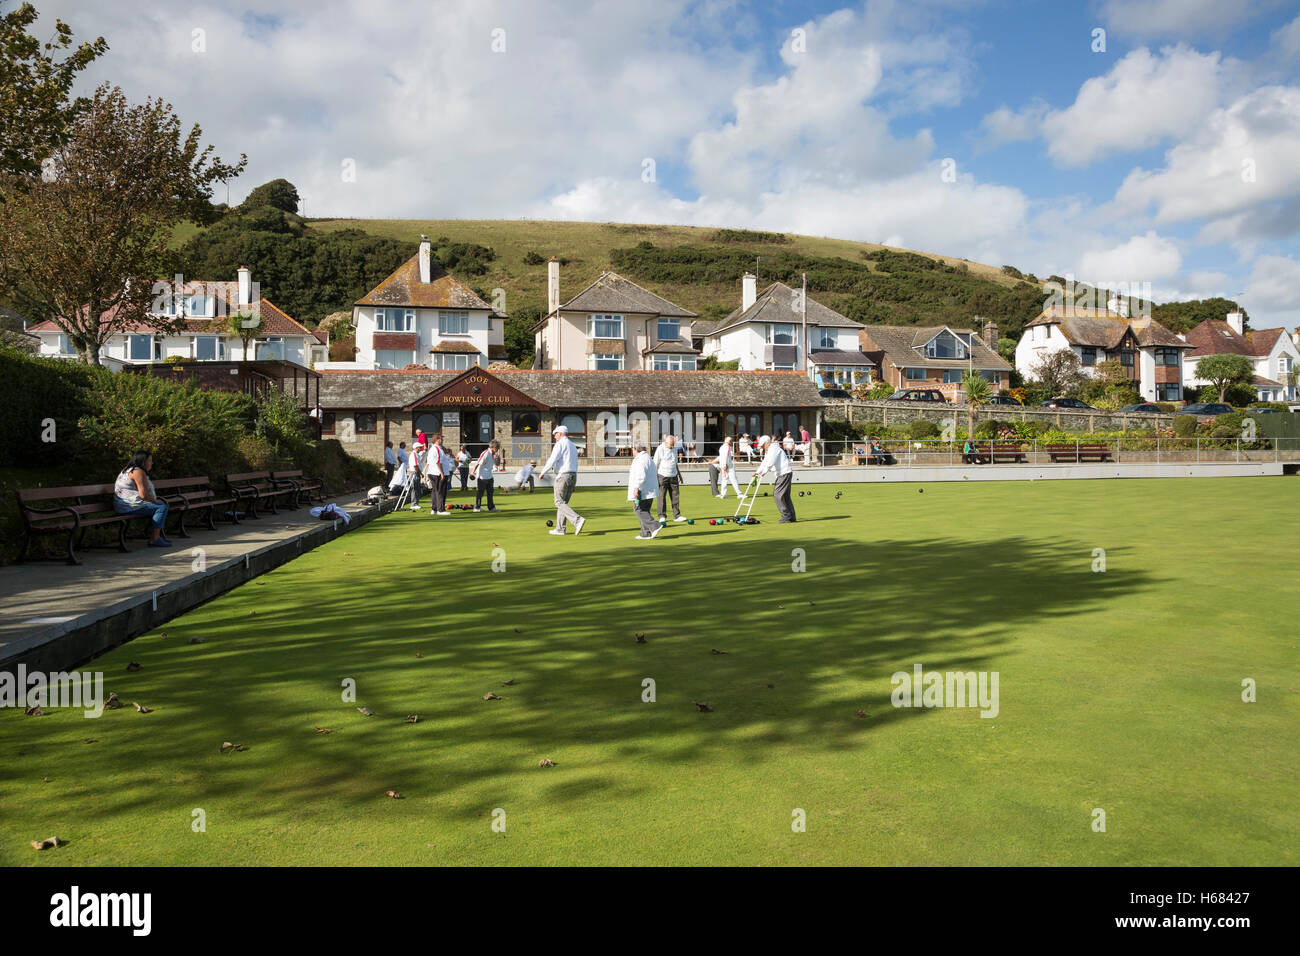 seniors outdoor bowls match on sunny day Stock Photo